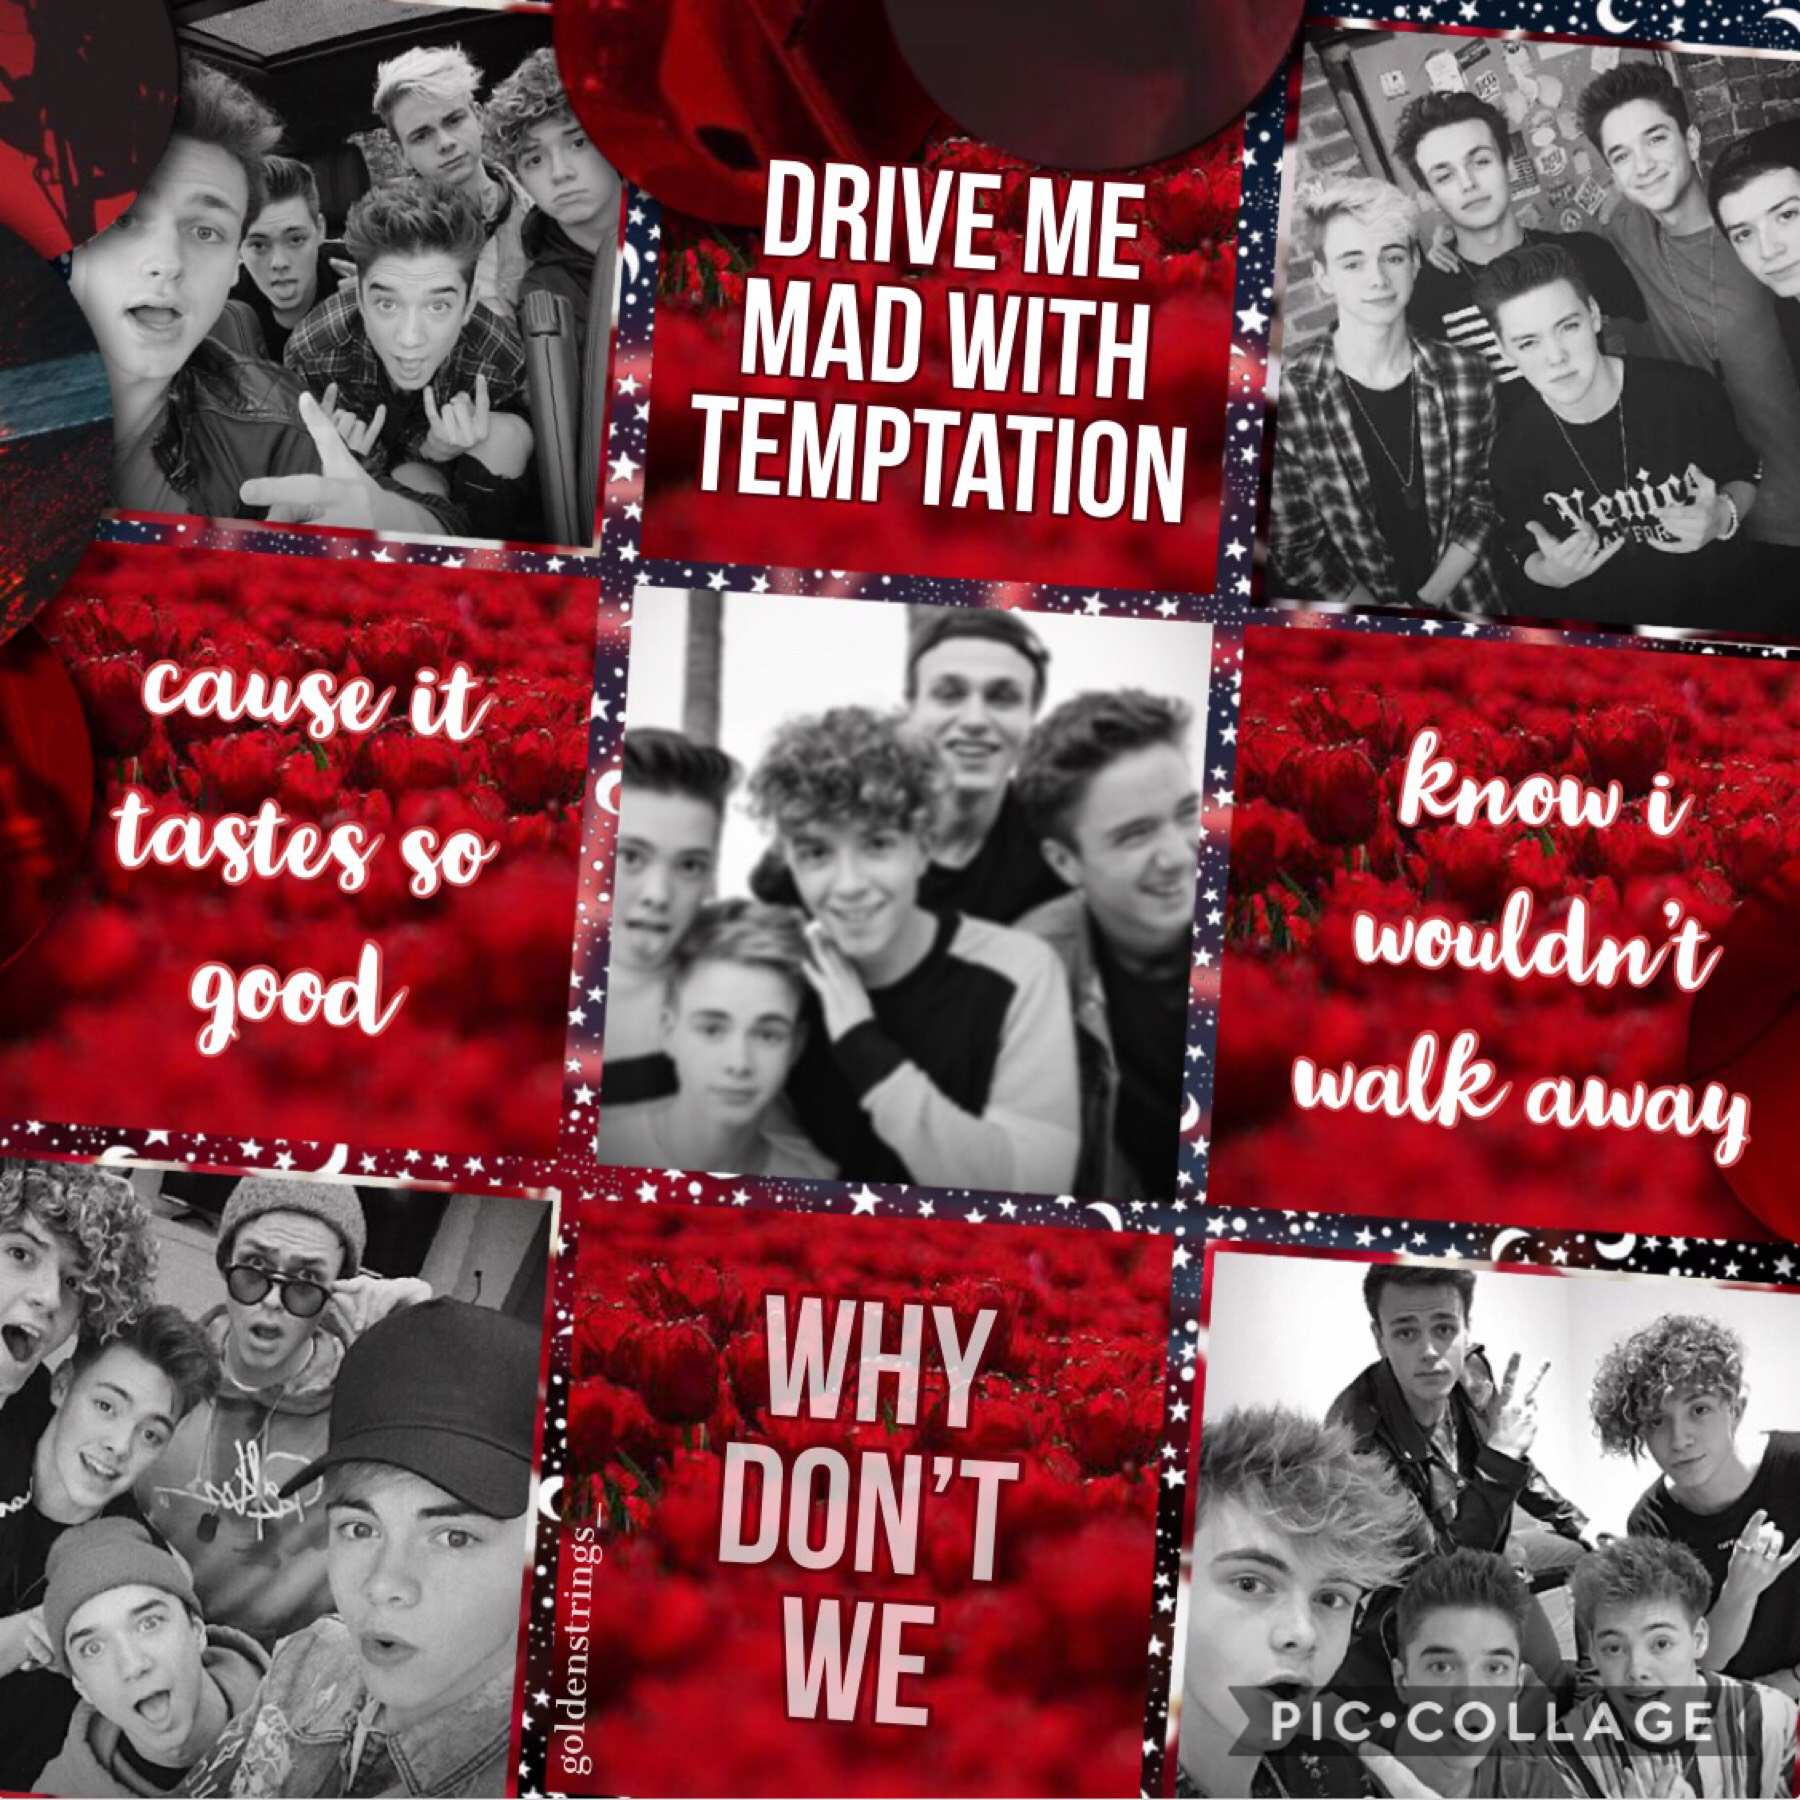 Red Why Don’t We Edit! ❤️